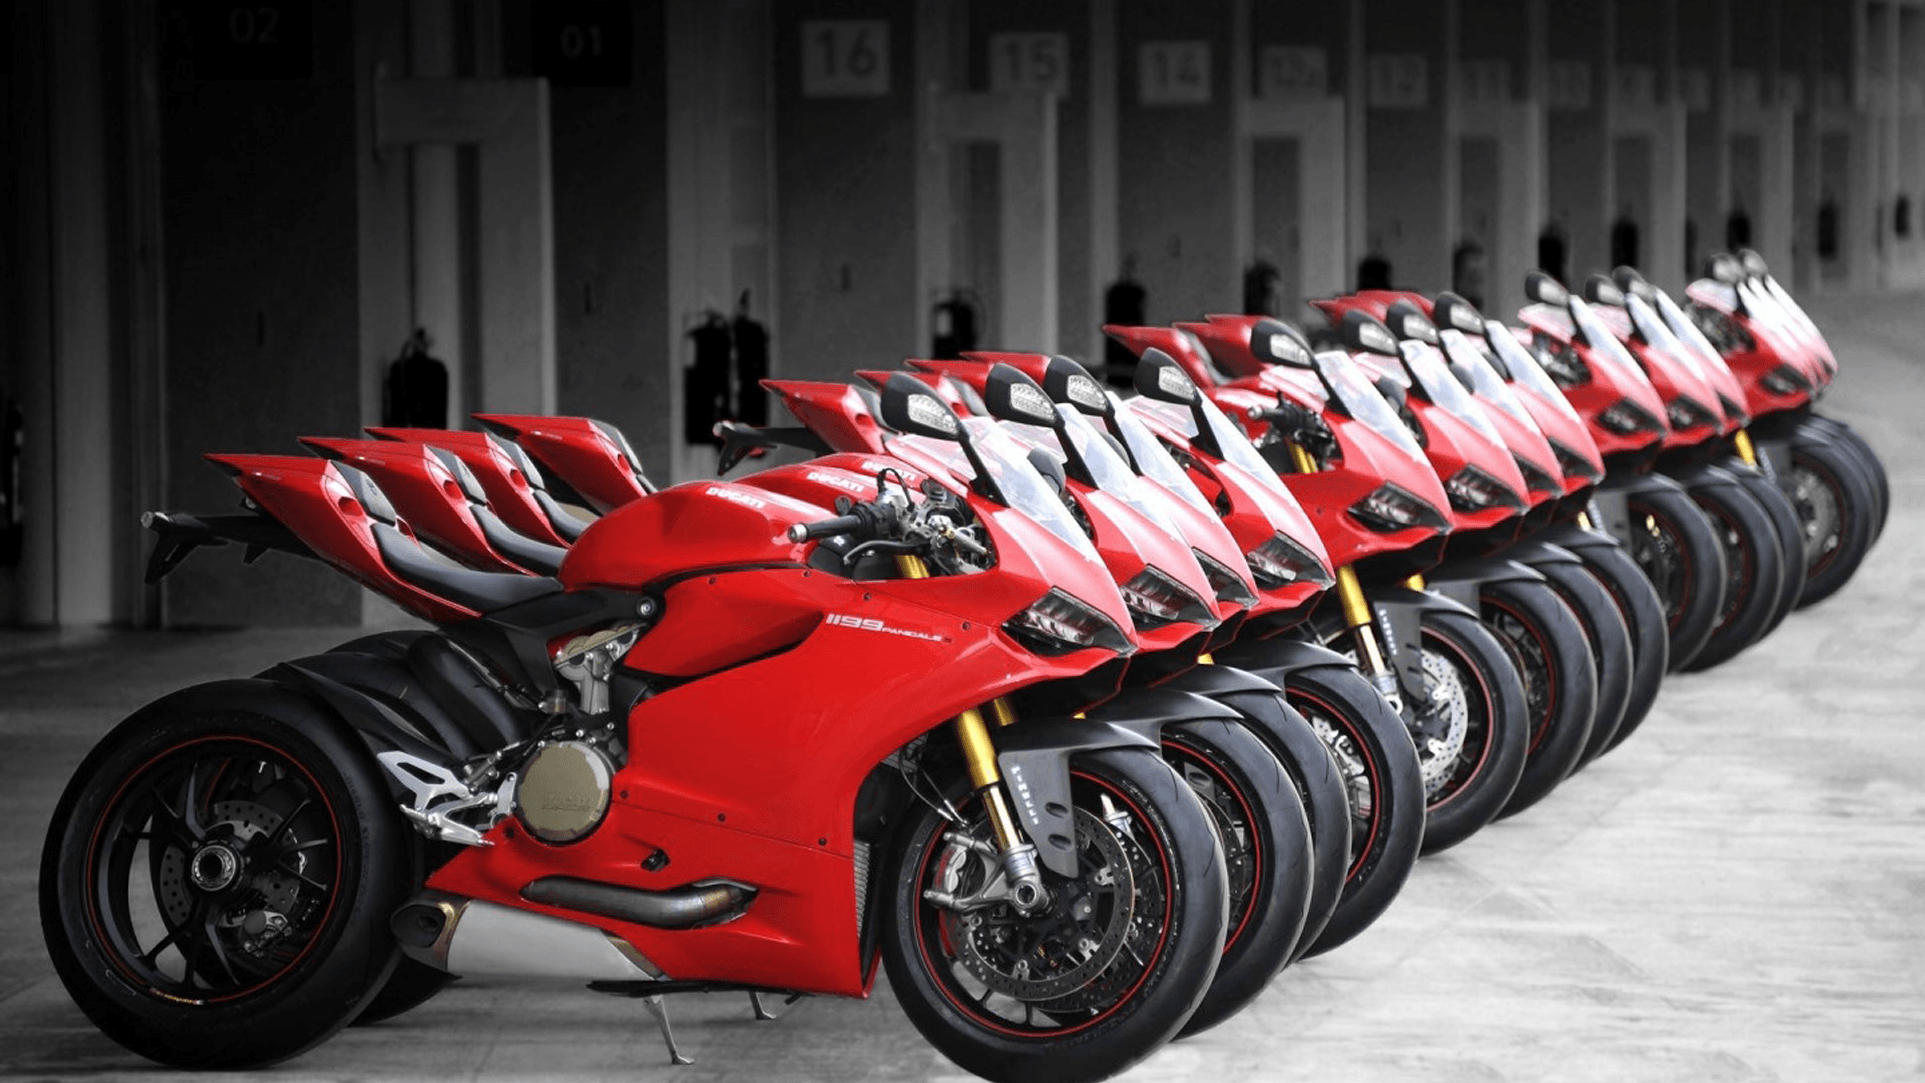 Ducati Wallpapers 85 images inside